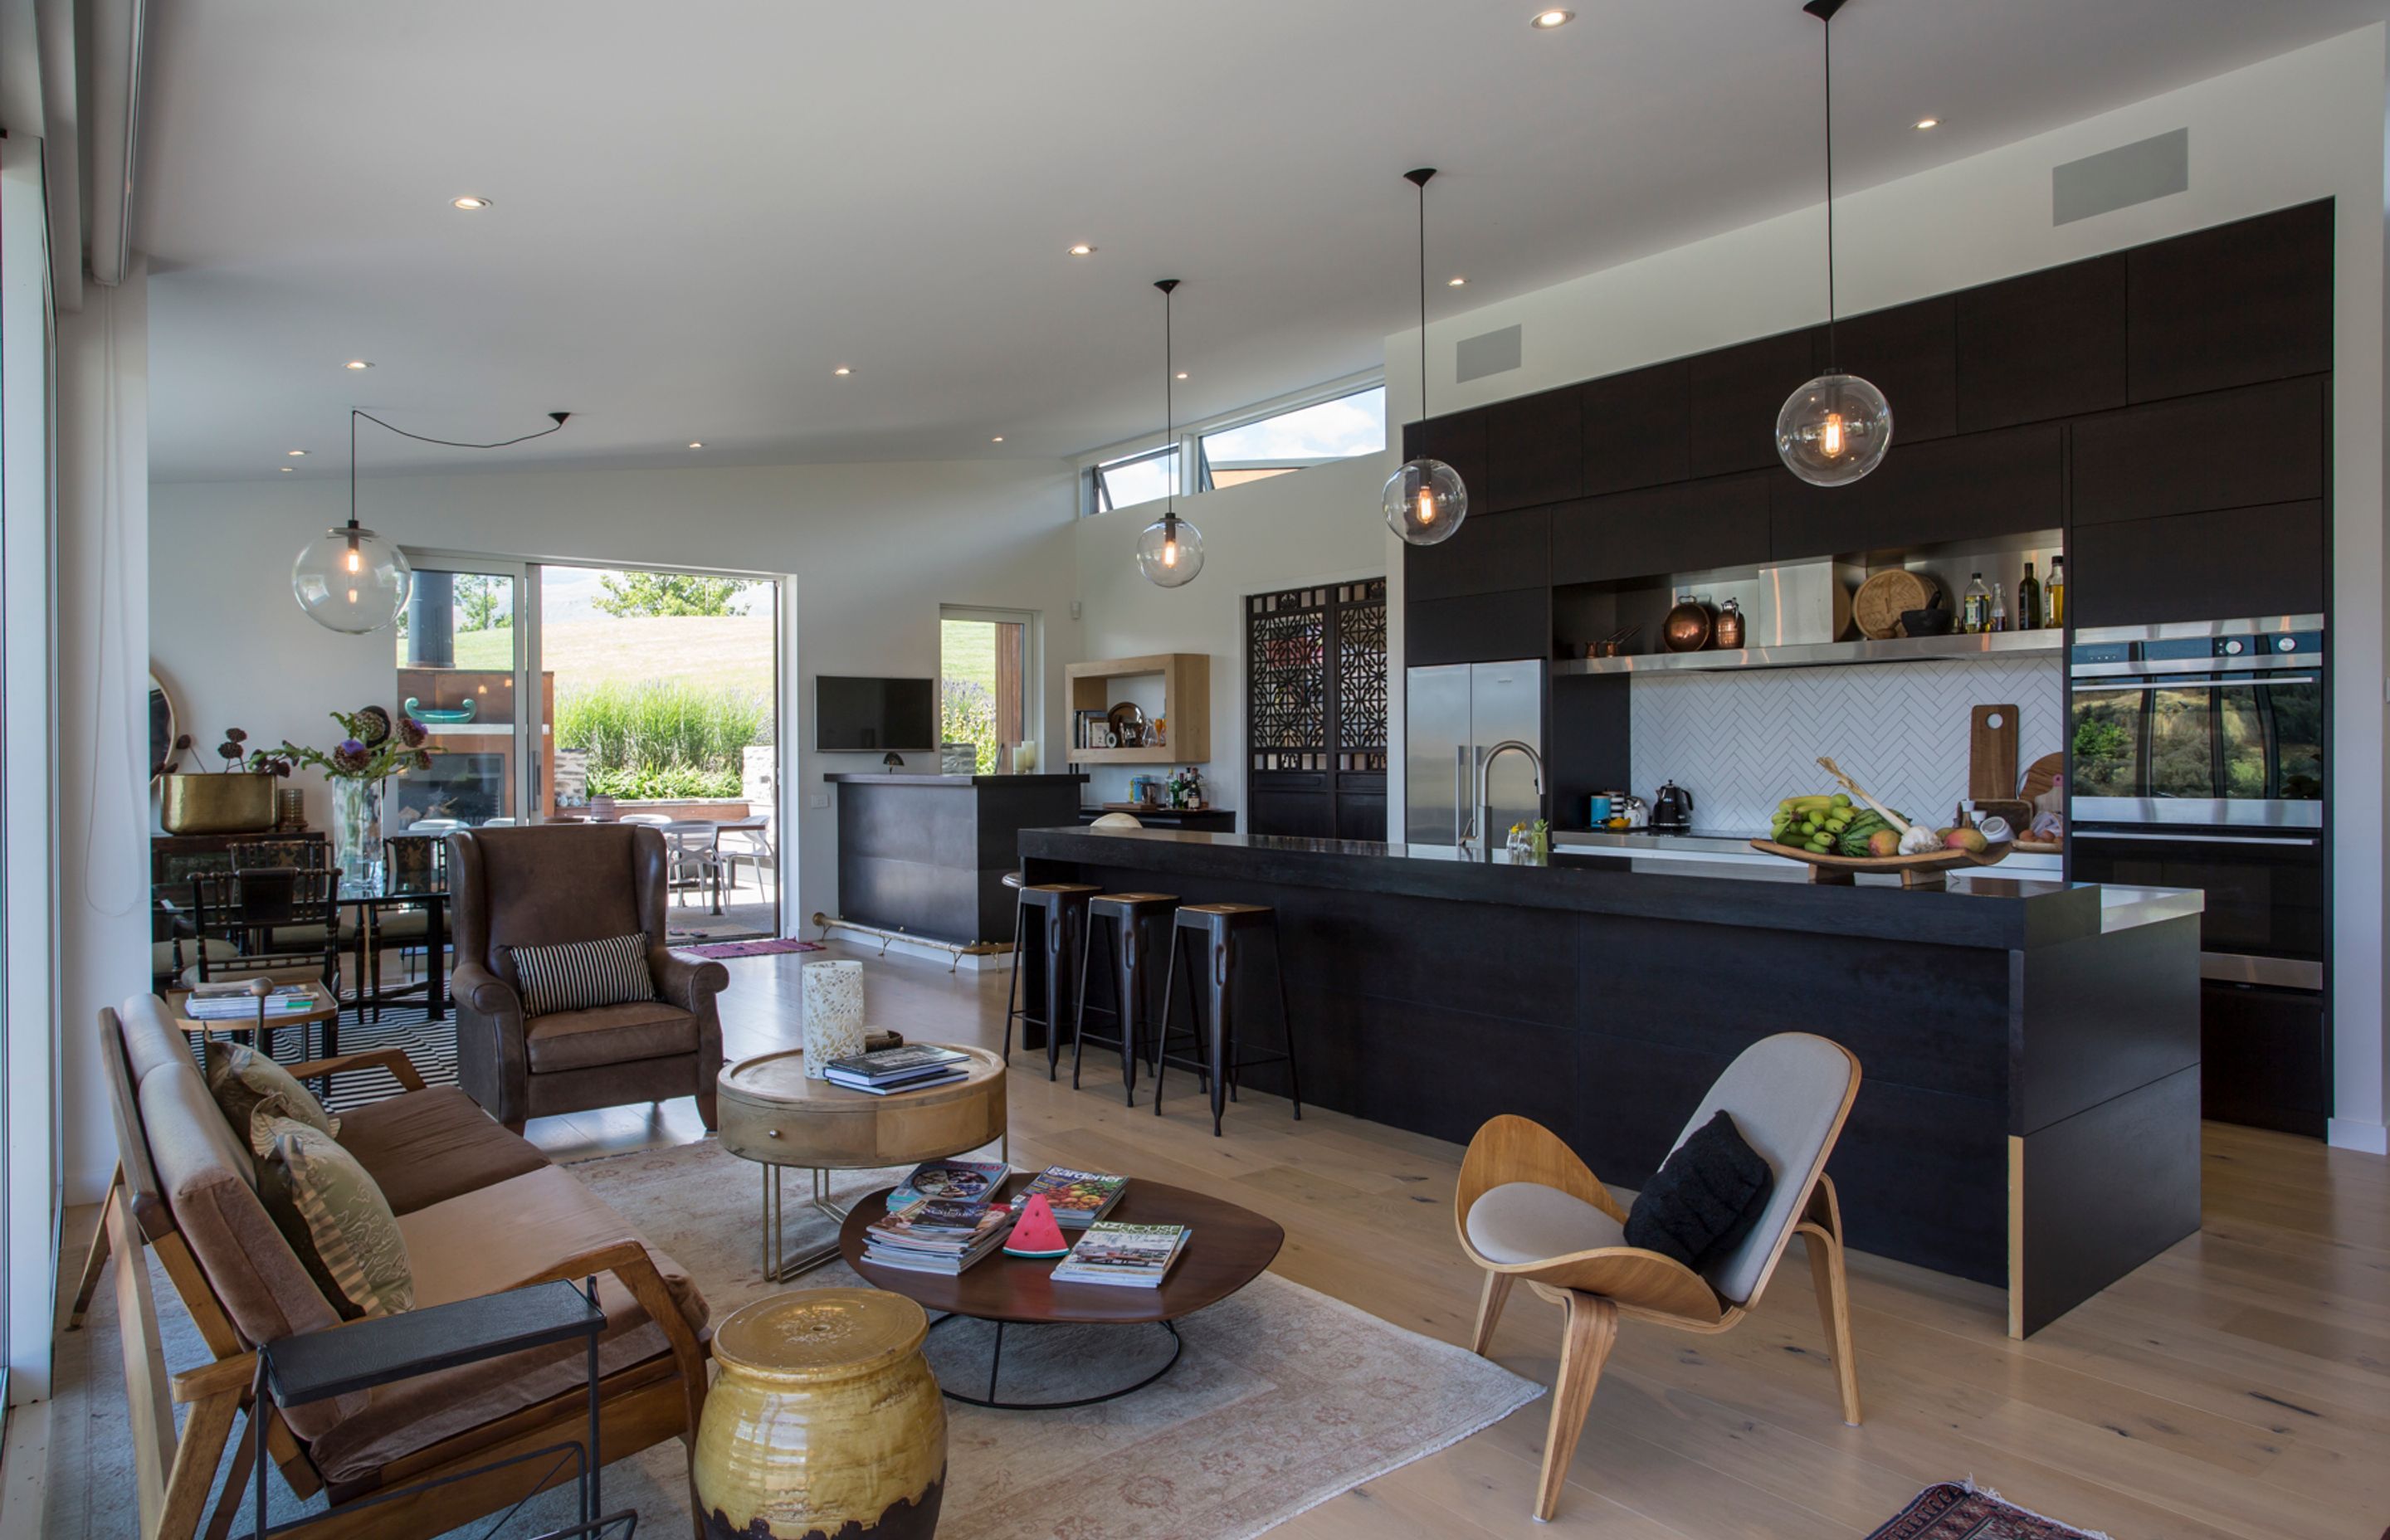 Triple-aspect doors and windows—including clerestory windows above the bar area—ensure the interior of the home remains light-filled throughout the day. A modern take on the classic 'black and white' scheme keeps things clean and crisp.